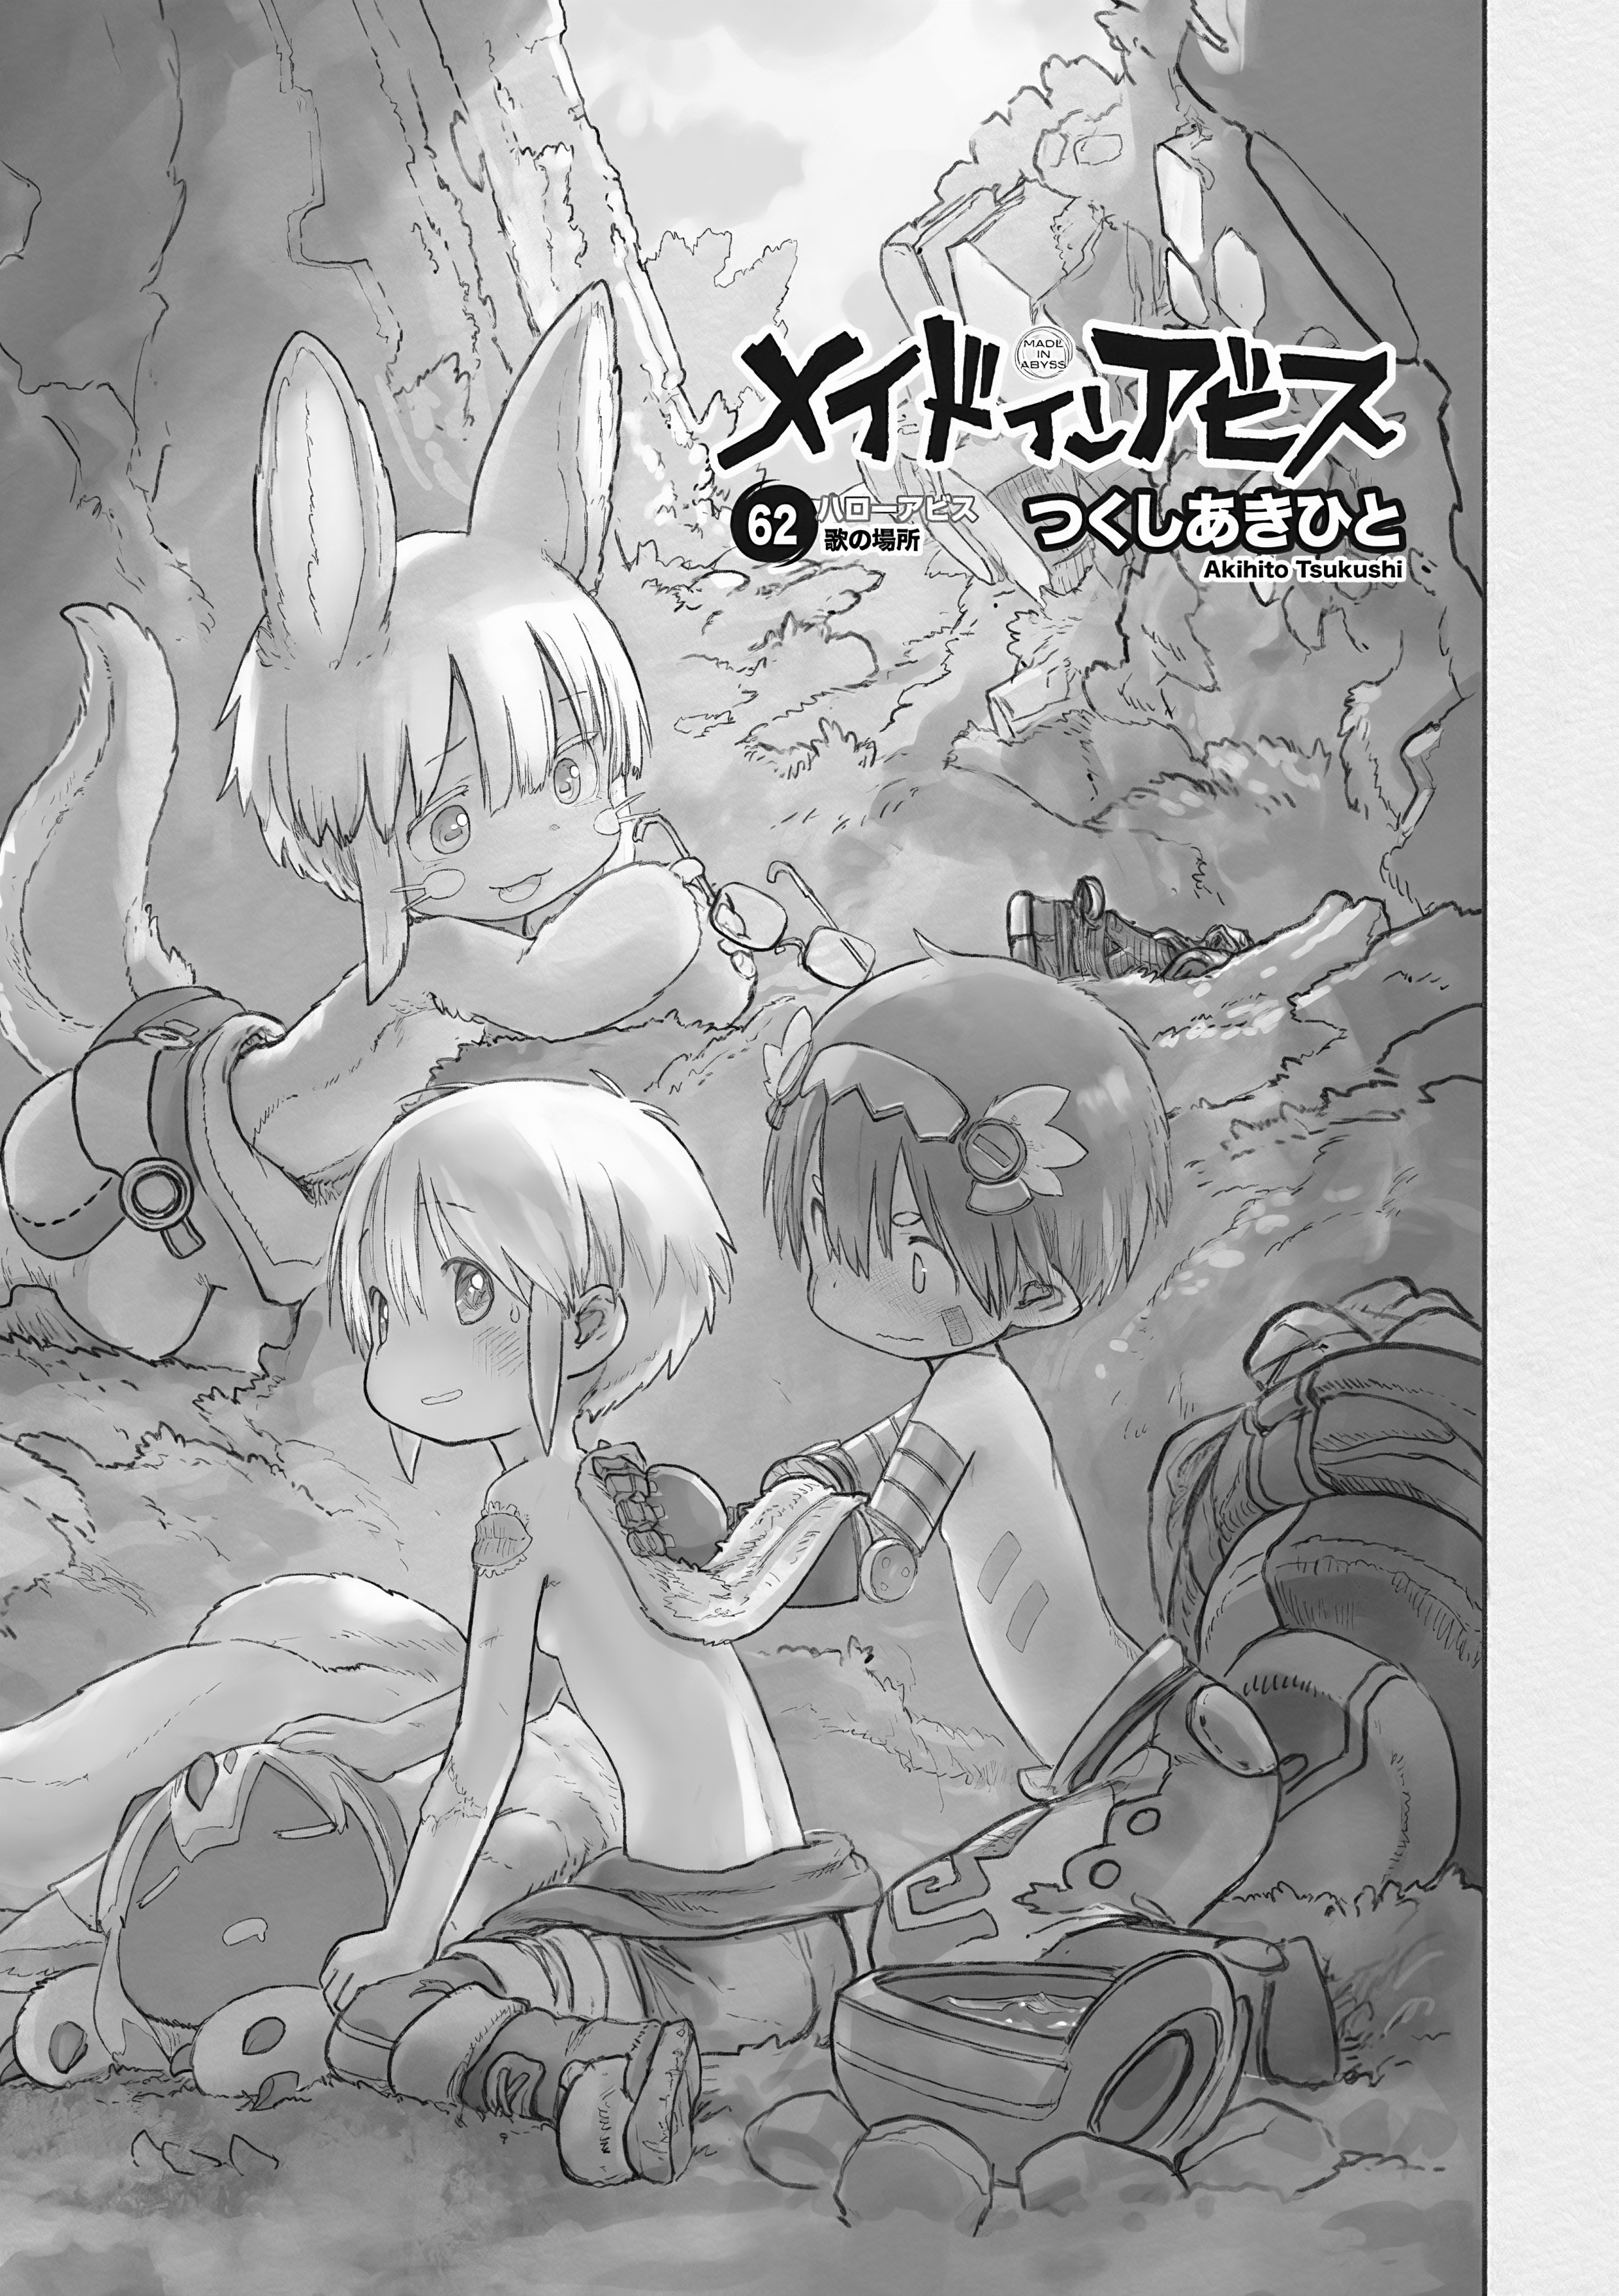 Made in Abyss Chapter 053, Made in Abyss Wiki